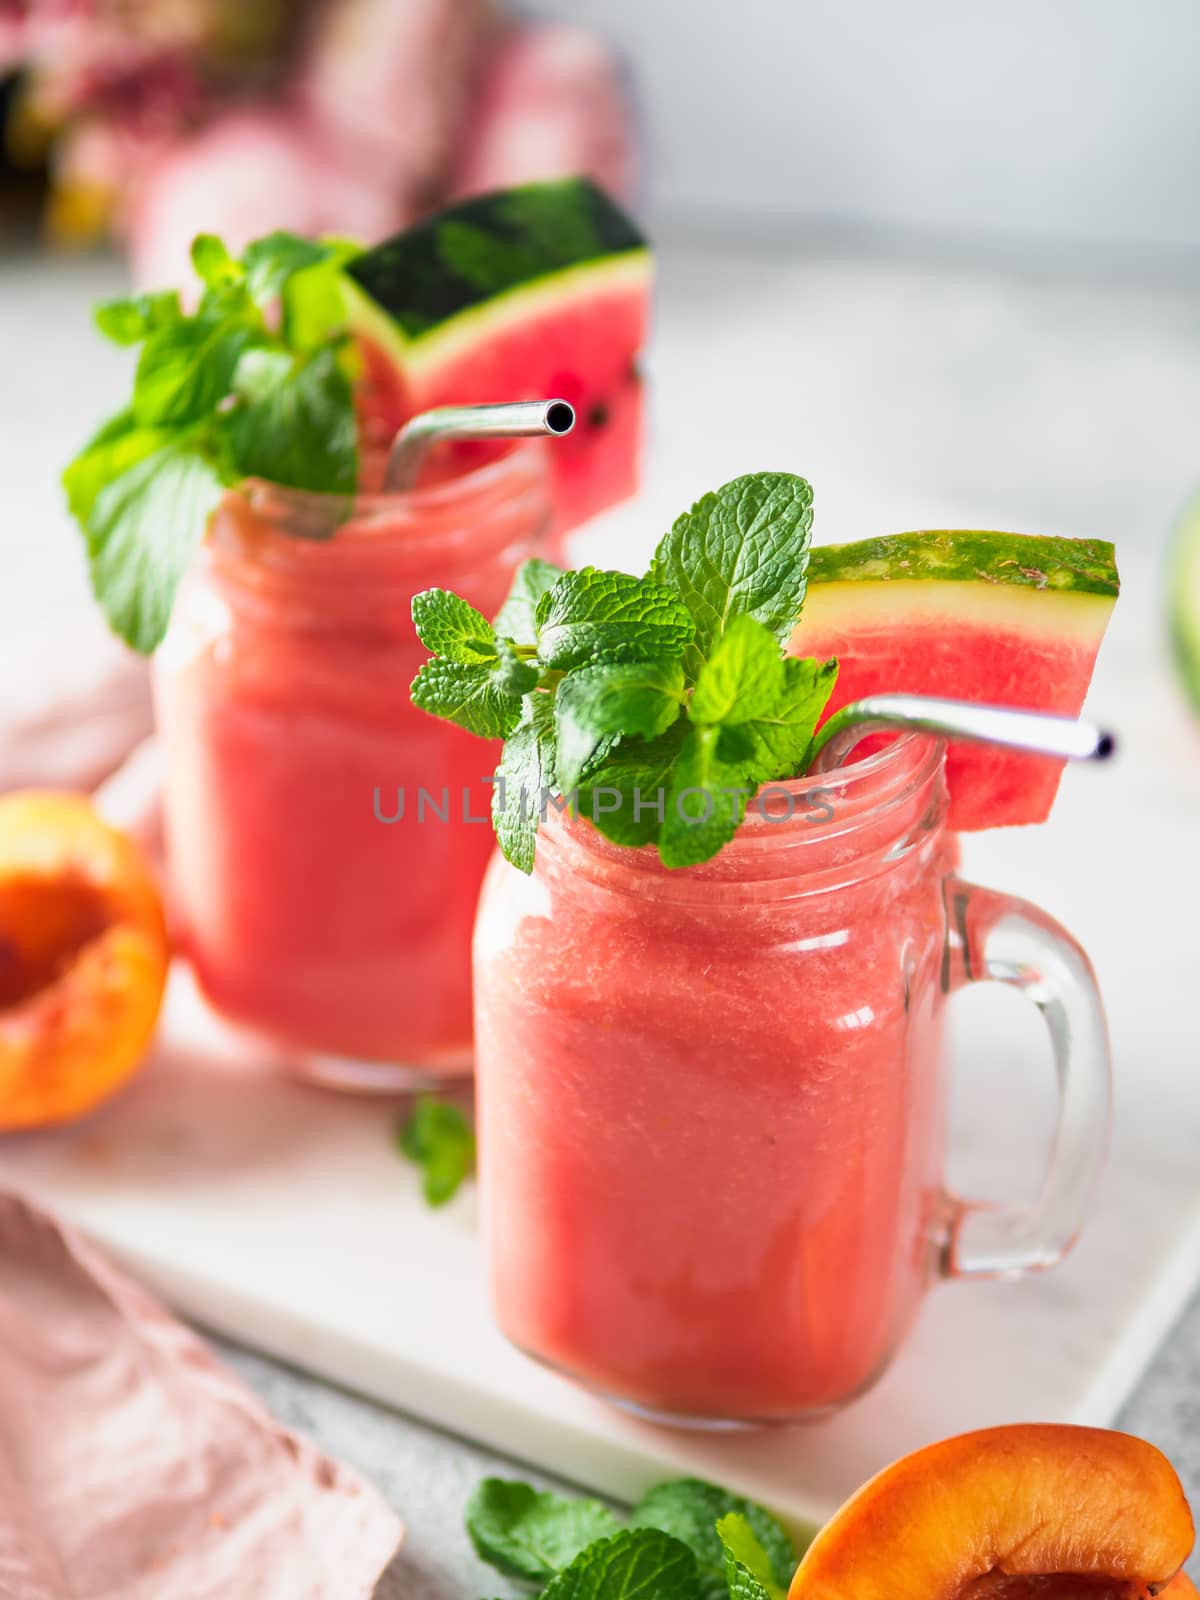 Watermelon and Peach Smoothies, copy space by fascinadora